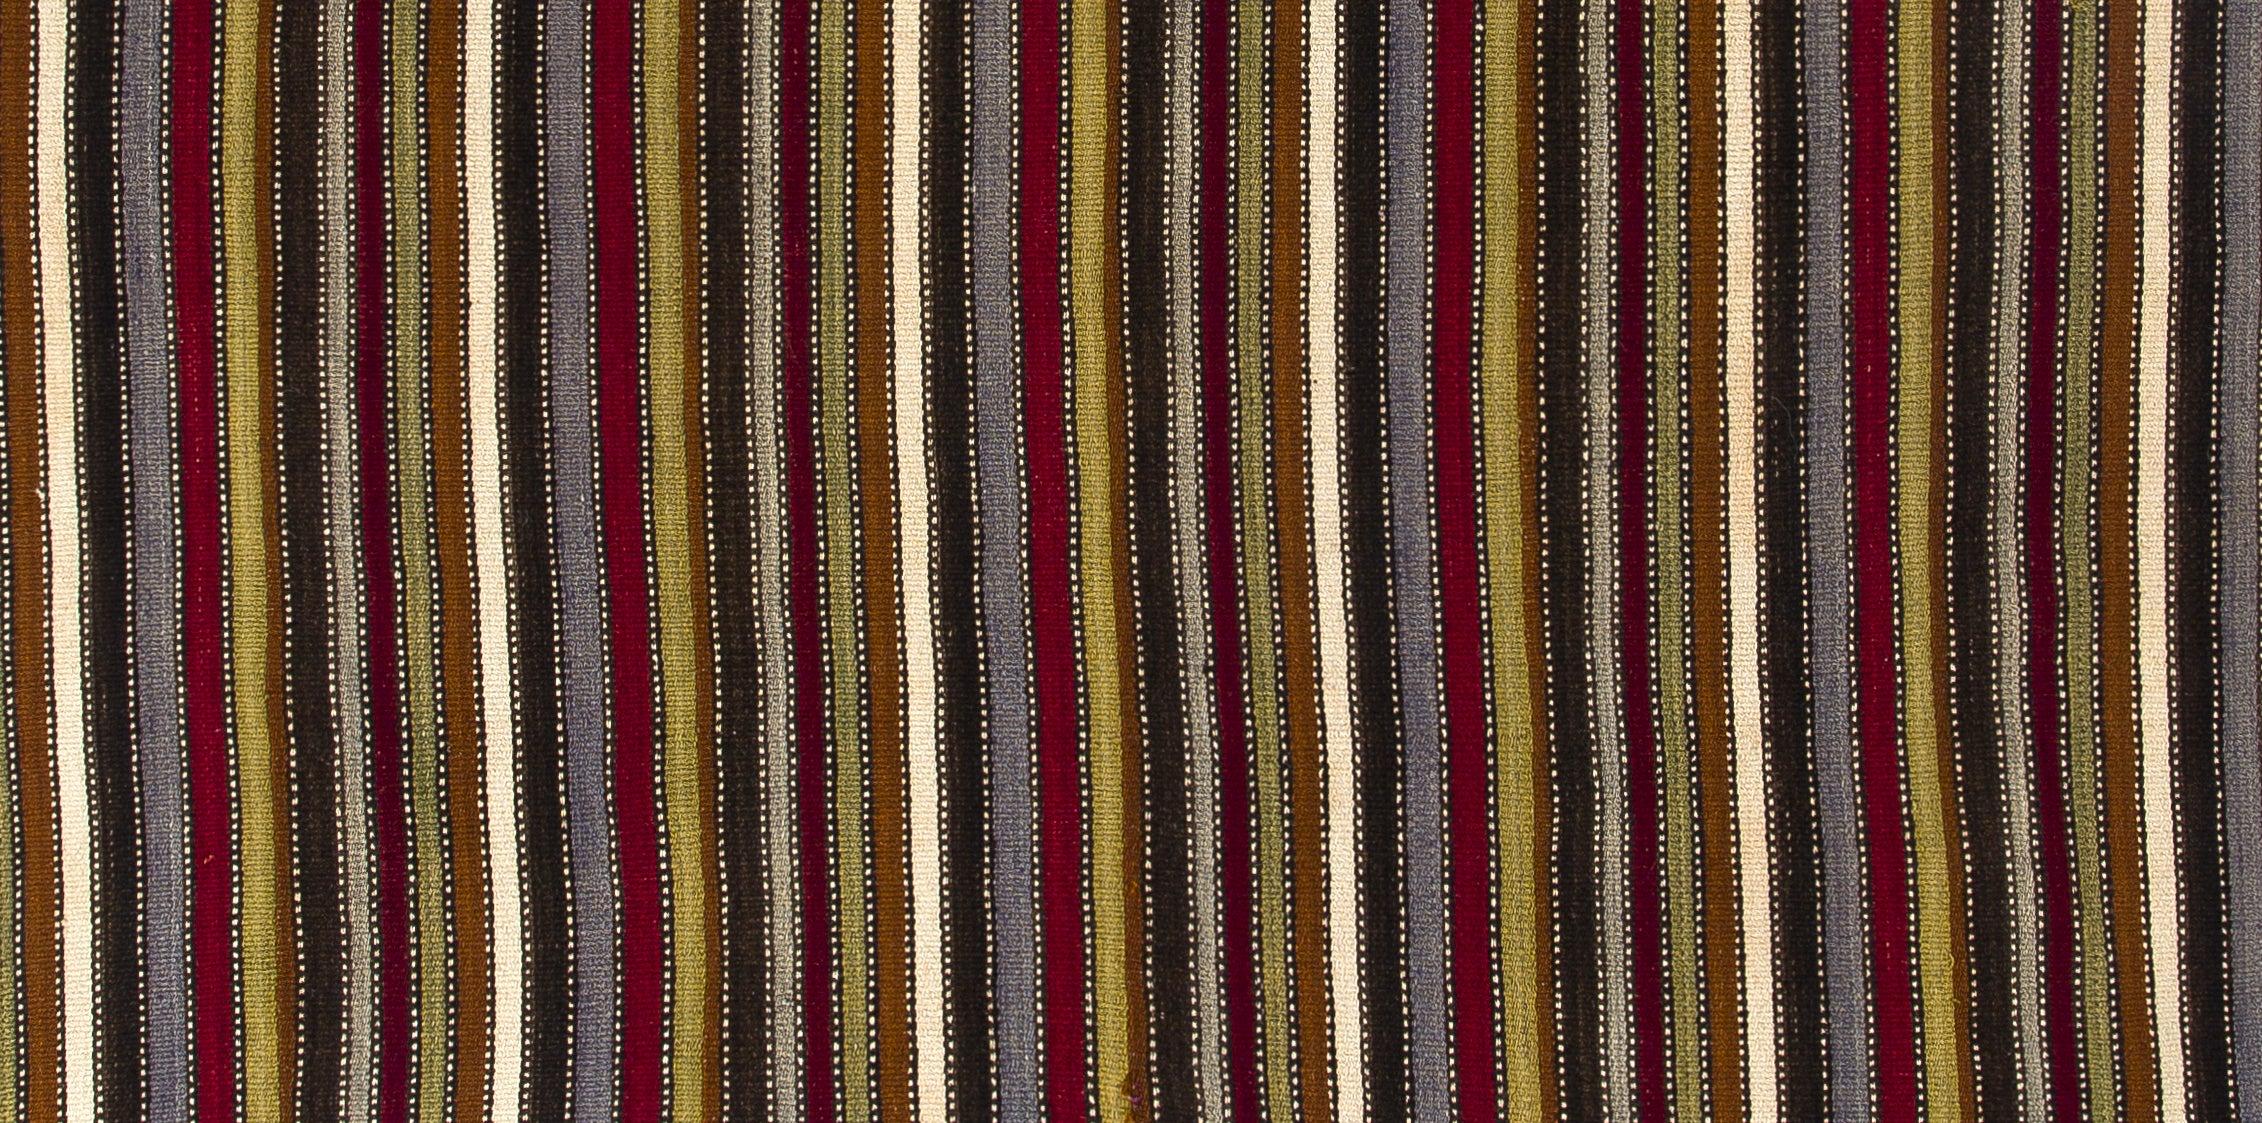 5.6x6 ft Handwoven Minimalist Vintage Striped Flat-Woven Turkish Wool Kilim Rug In Good Condition For Sale In Philadelphia, PA